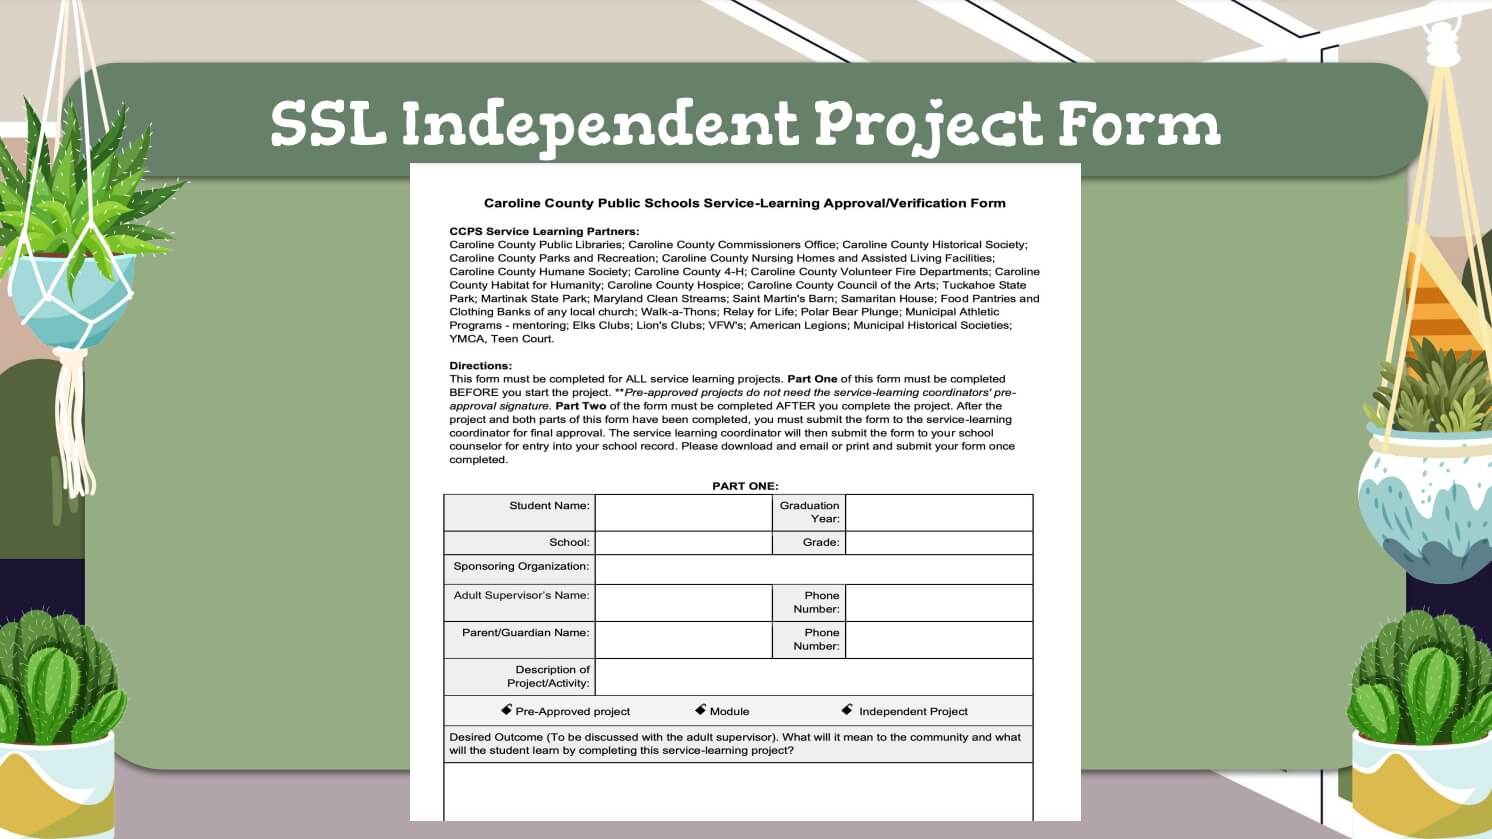 SSL Presentation Slide 4: Independent Project Form is available for parents to use to submit hours